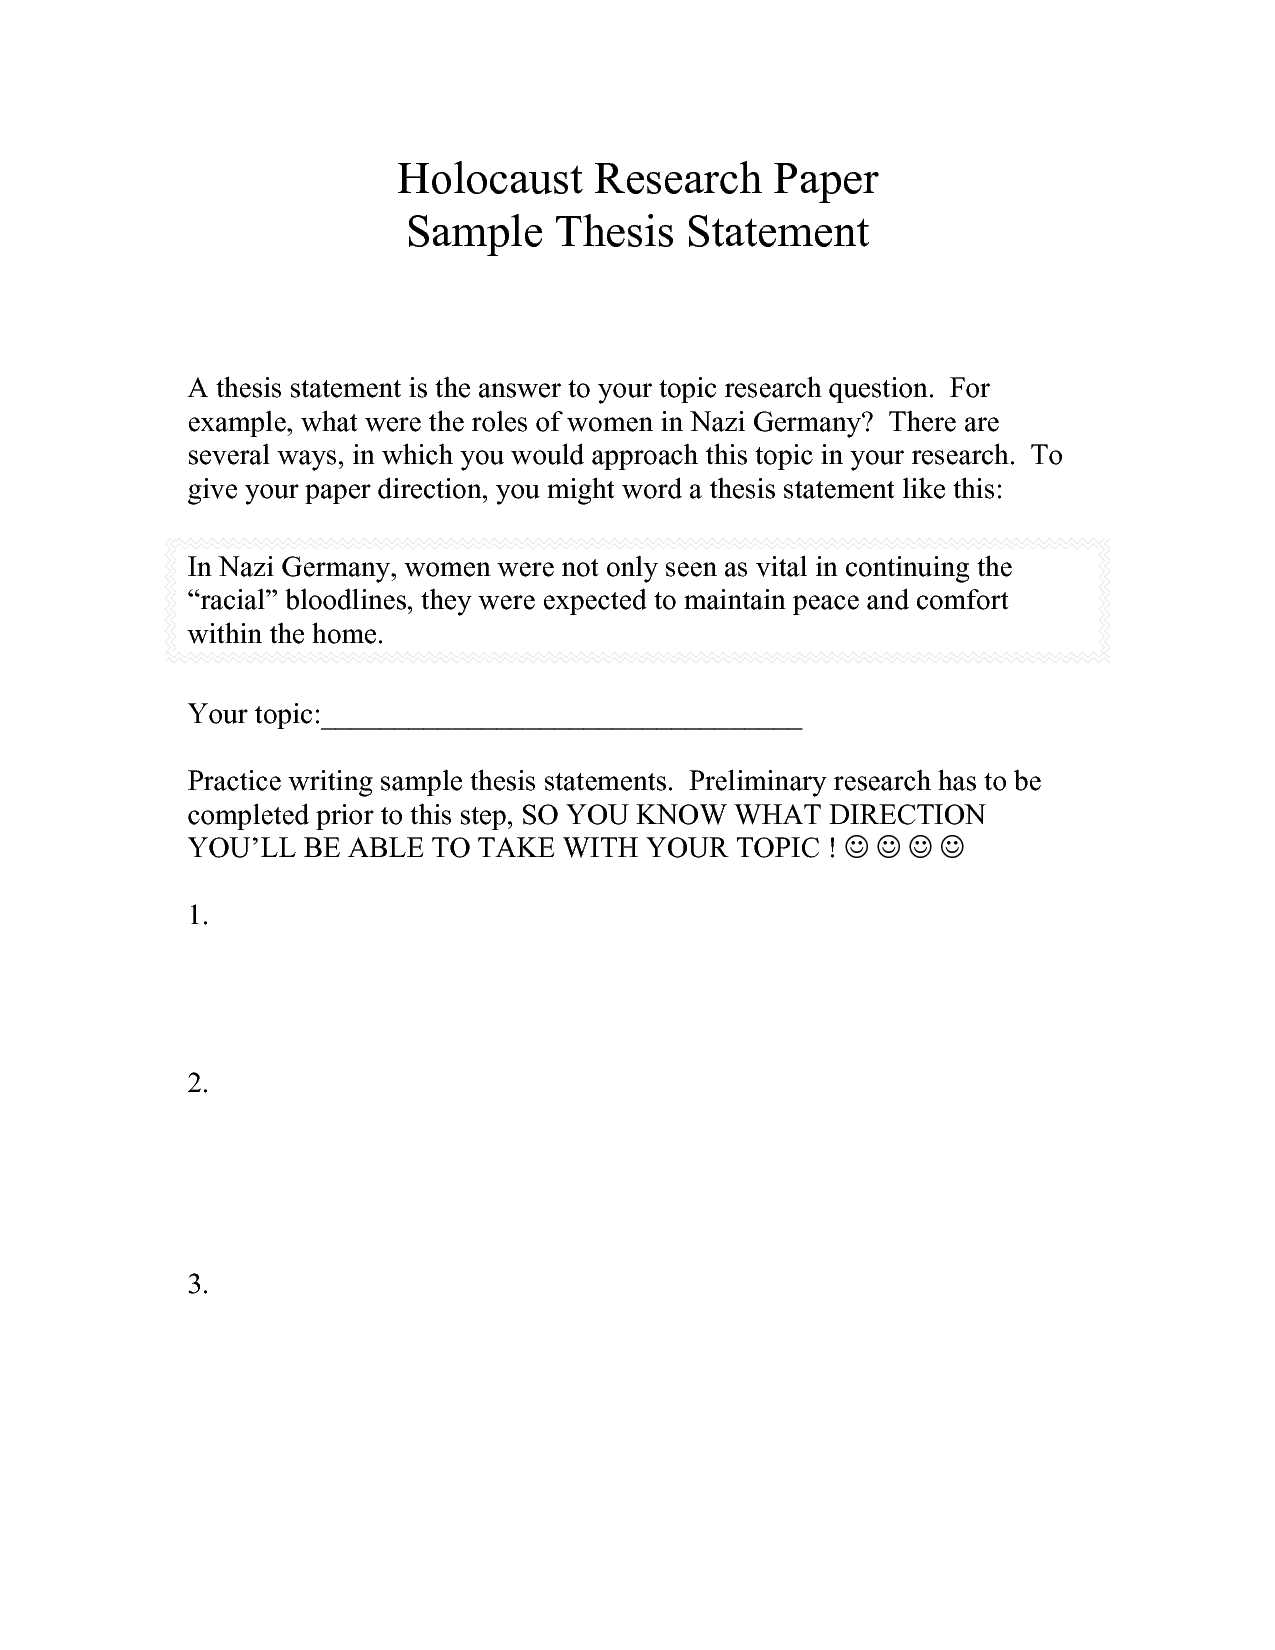 Thesis statement writing help